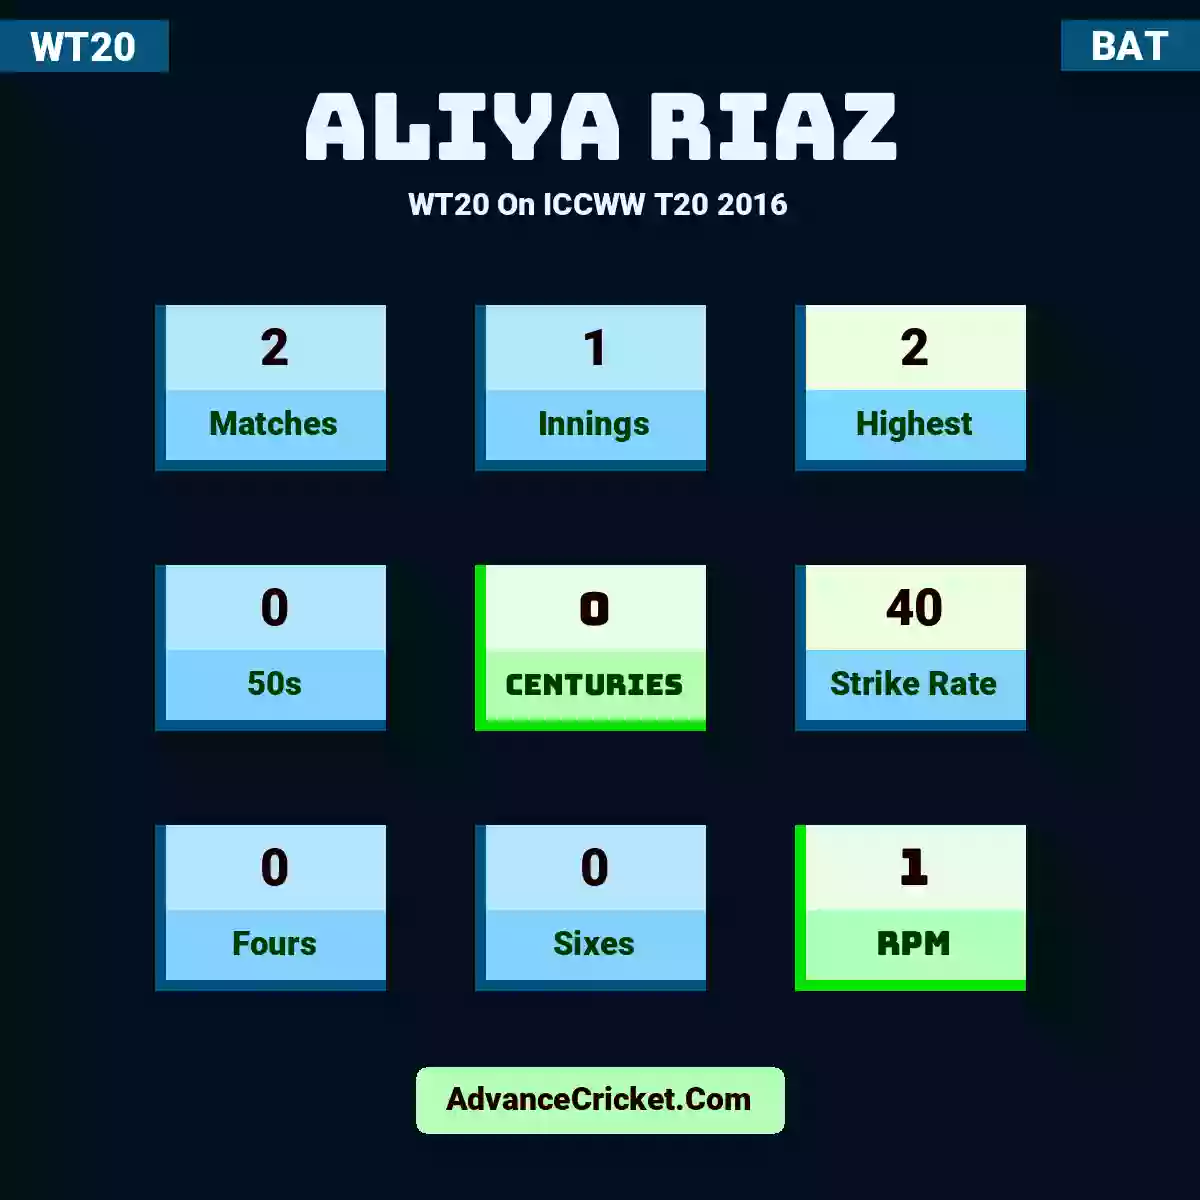 Aliya Riaz WT20  On ICCWW T20 2016, Aliya Riaz played 2 matches, scored 2 runs as highest, 0 half-centuries, and 0 centuries, with a strike rate of 40. A.Riaz hit 0 fours and 0 sixes, with an RPM of 1.